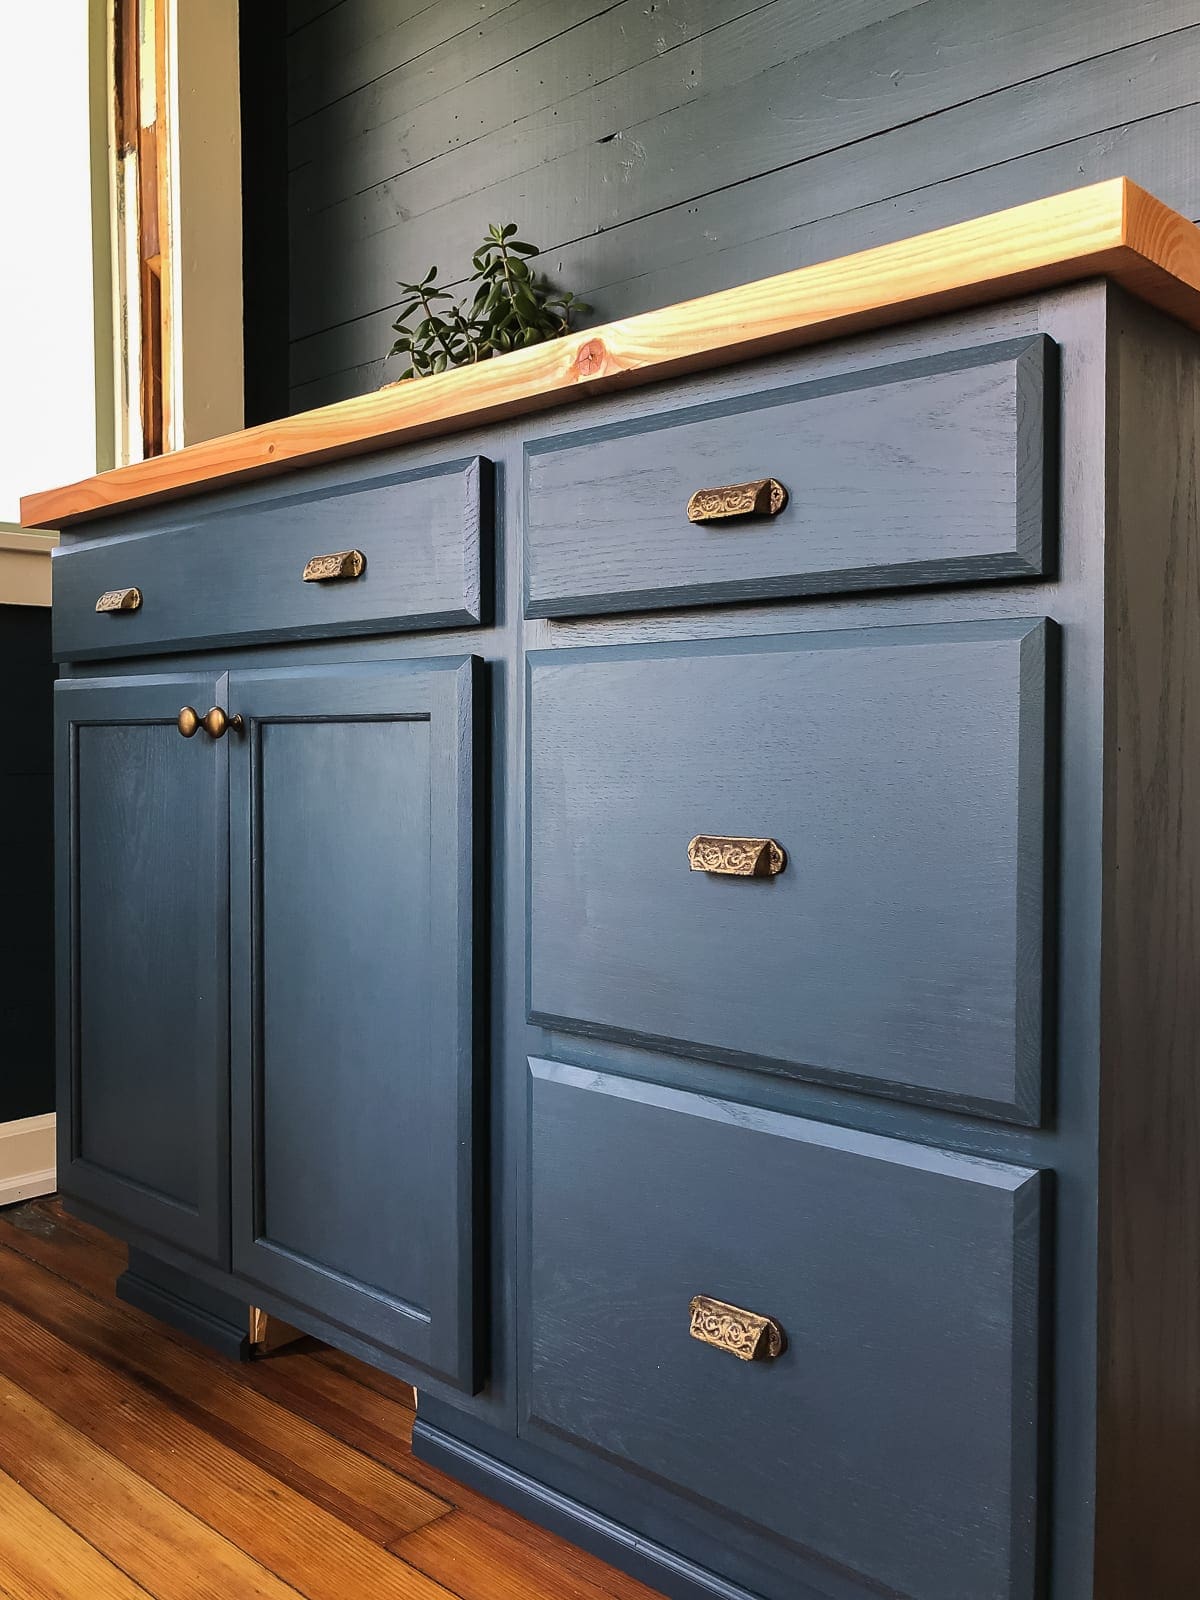 Painting Unfinished Cabinets How To, Can You Paint Birch Cabinets